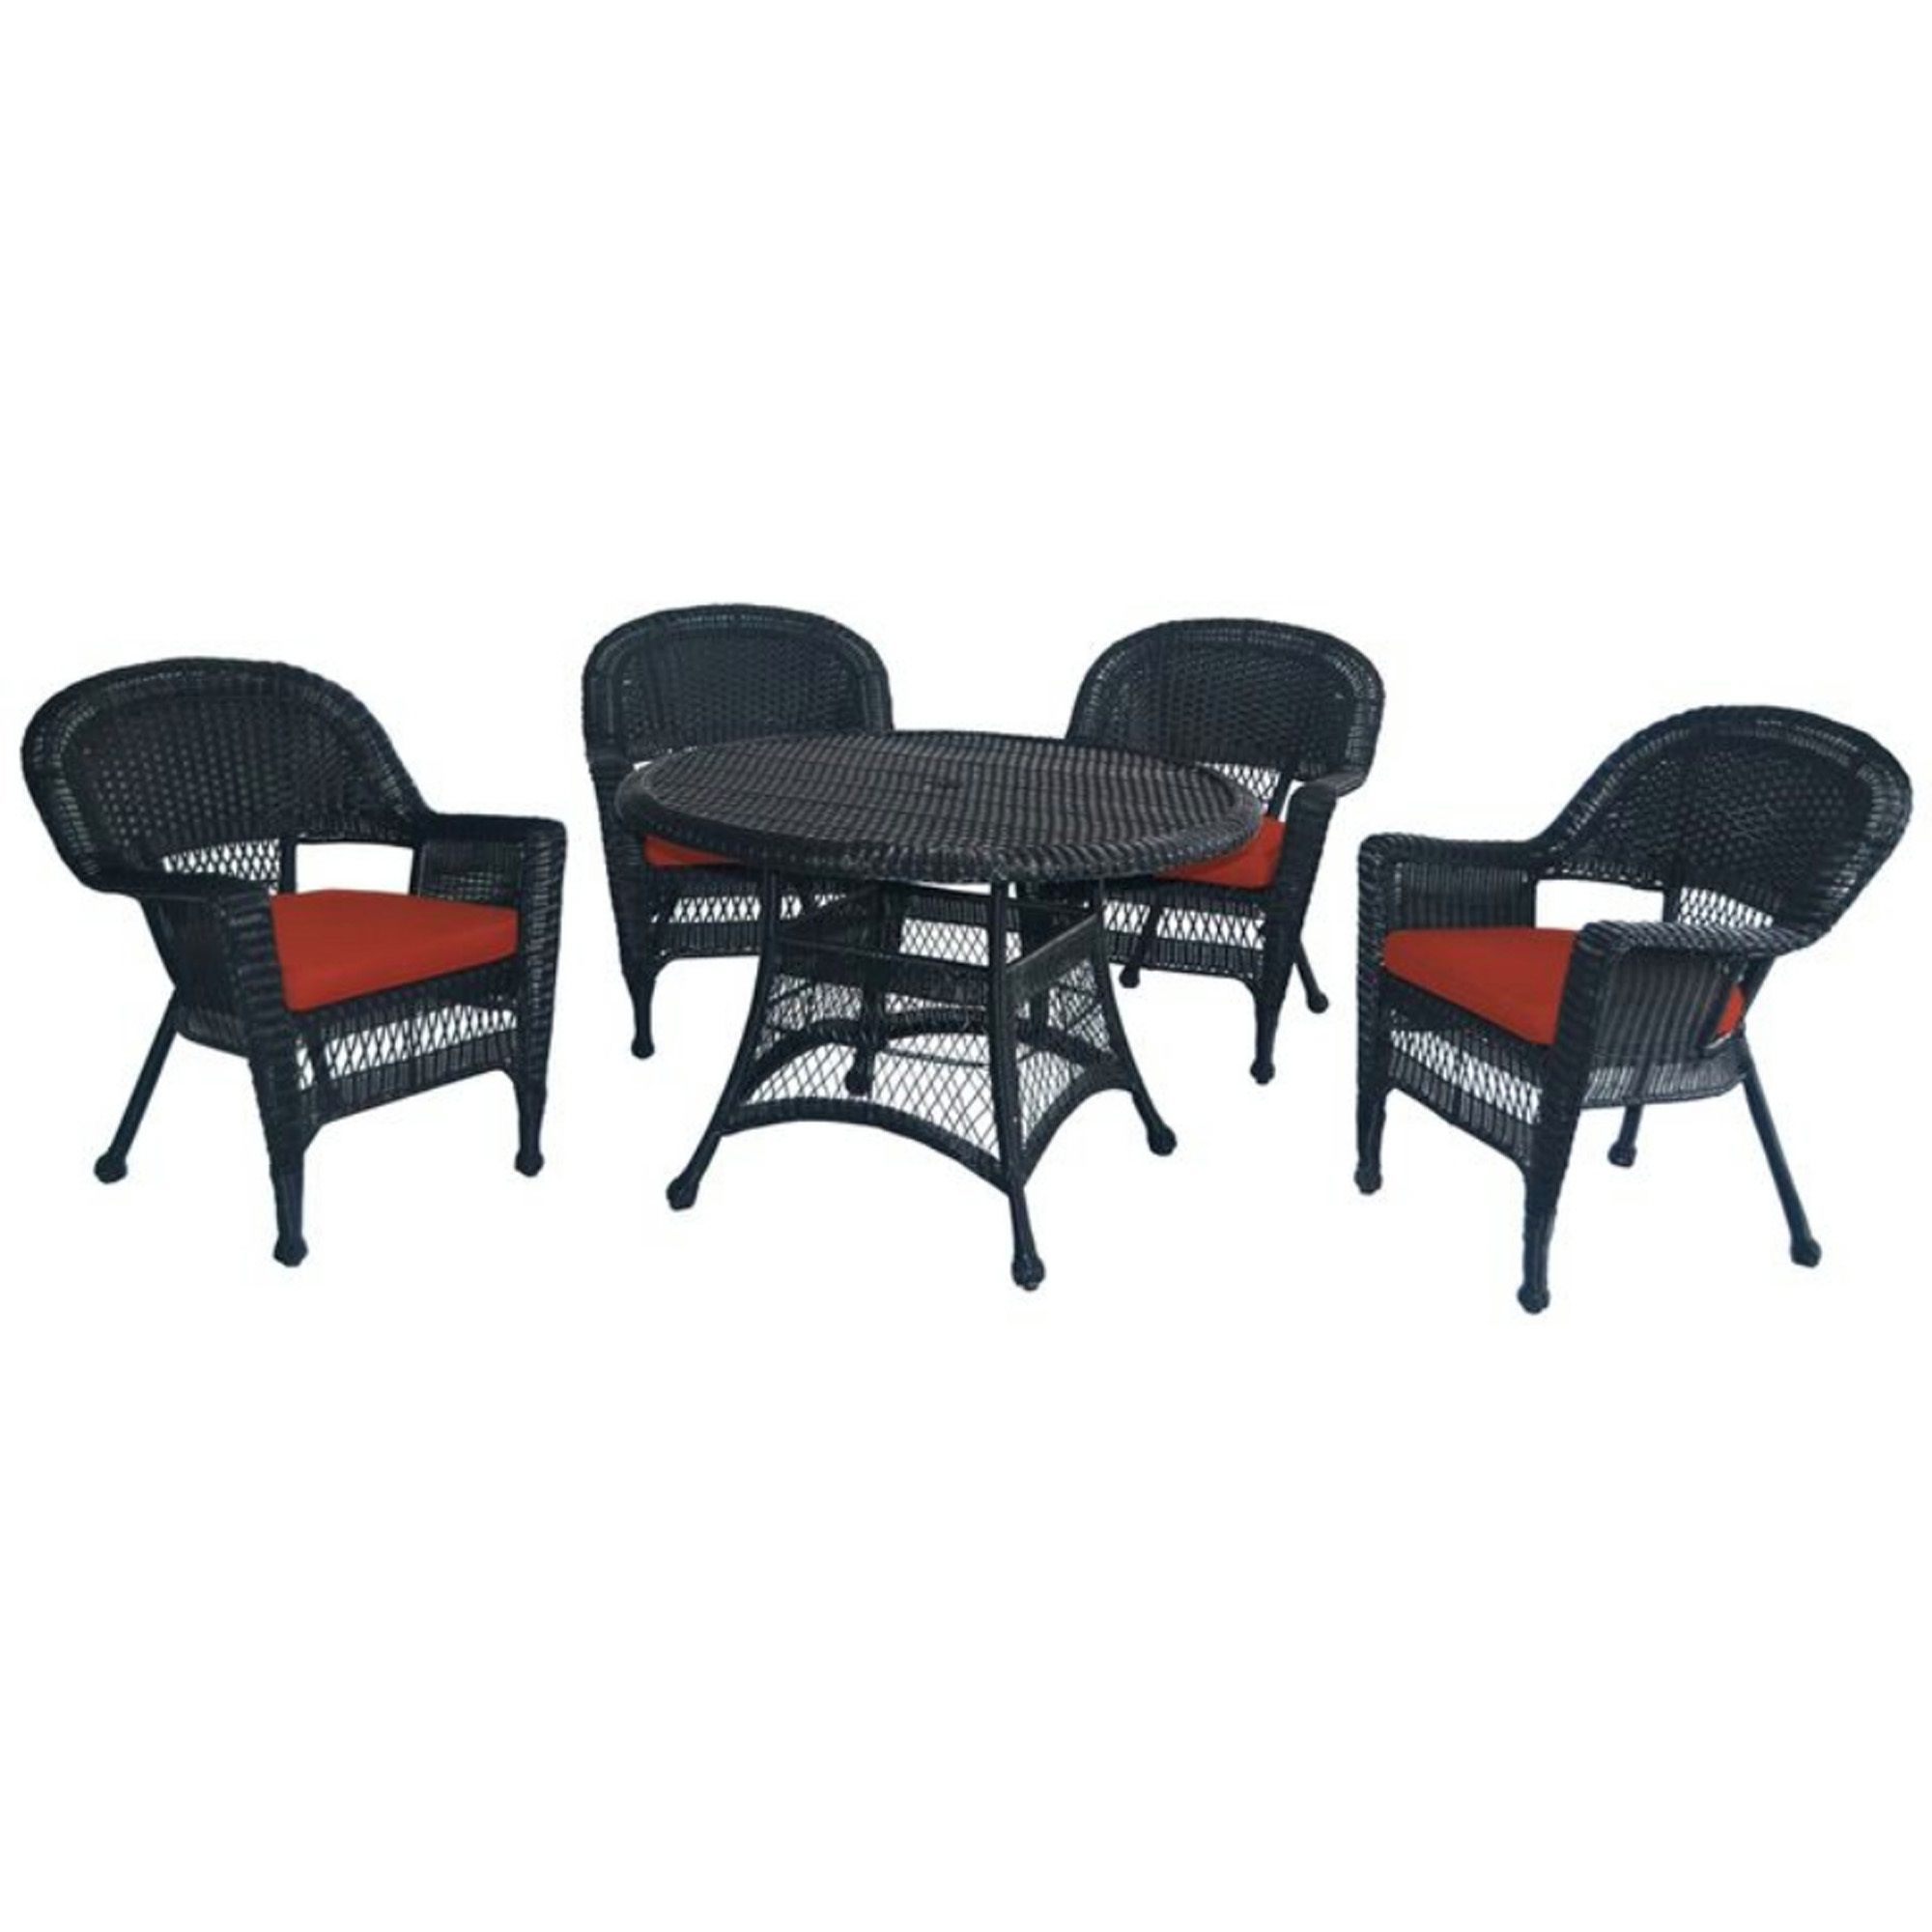 5 Piece Black Resin Wicker Chair & Table Patio Dining Furniture Set Within Most Up To Date Red 5 Piece Outdoor Dining Sets (View 12 of 15)